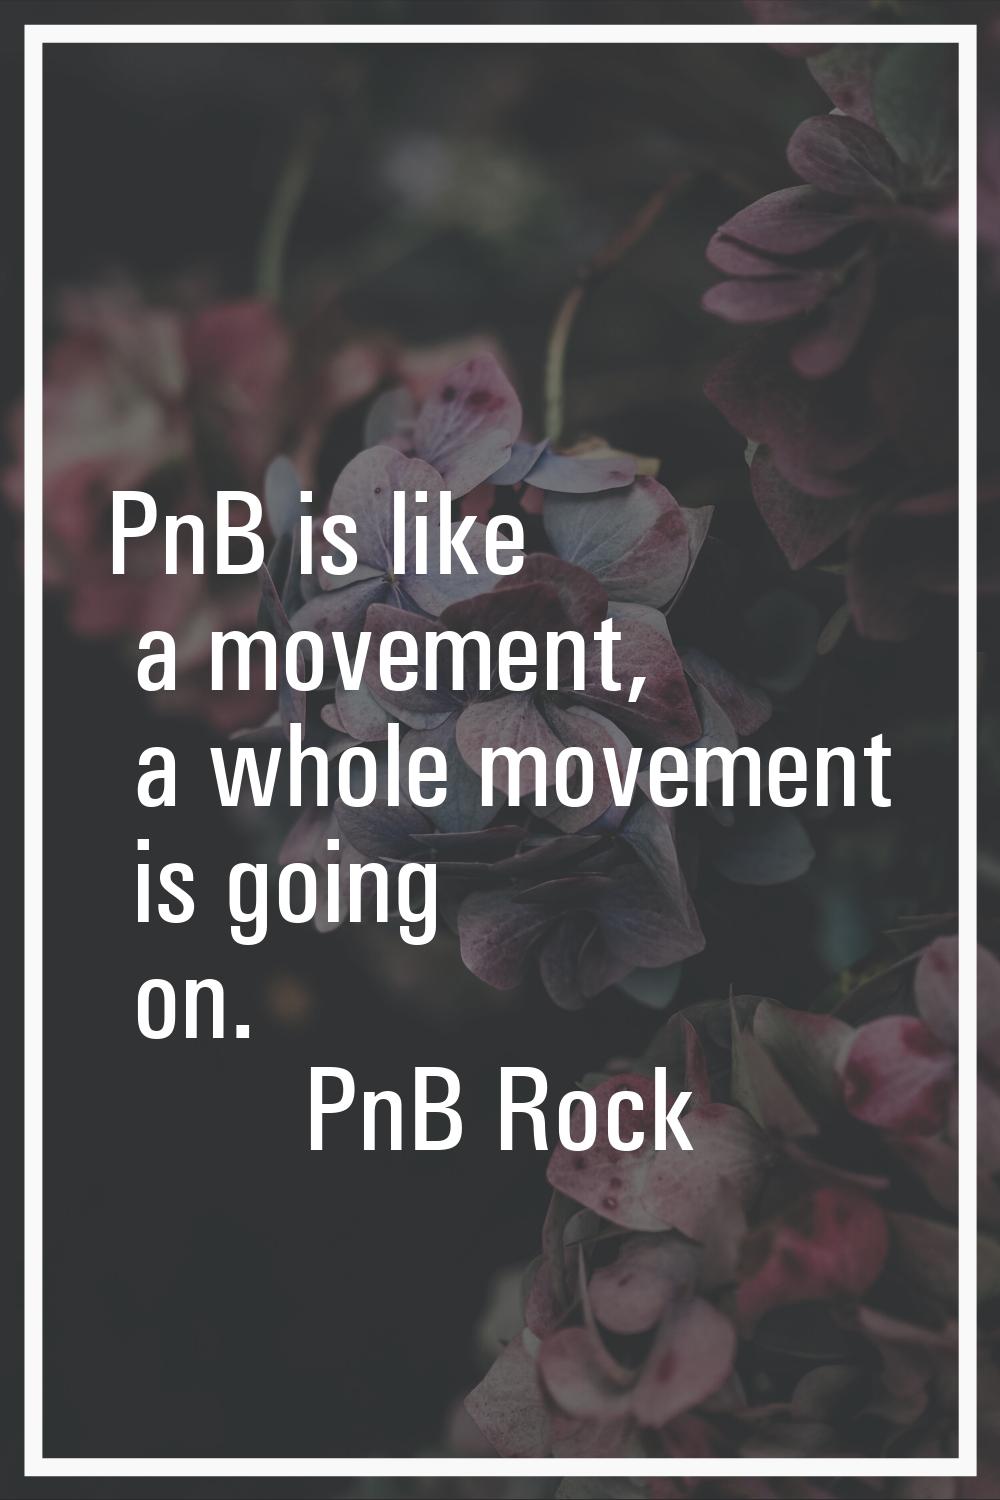 PnB is like a movement, a whole movement is going on.